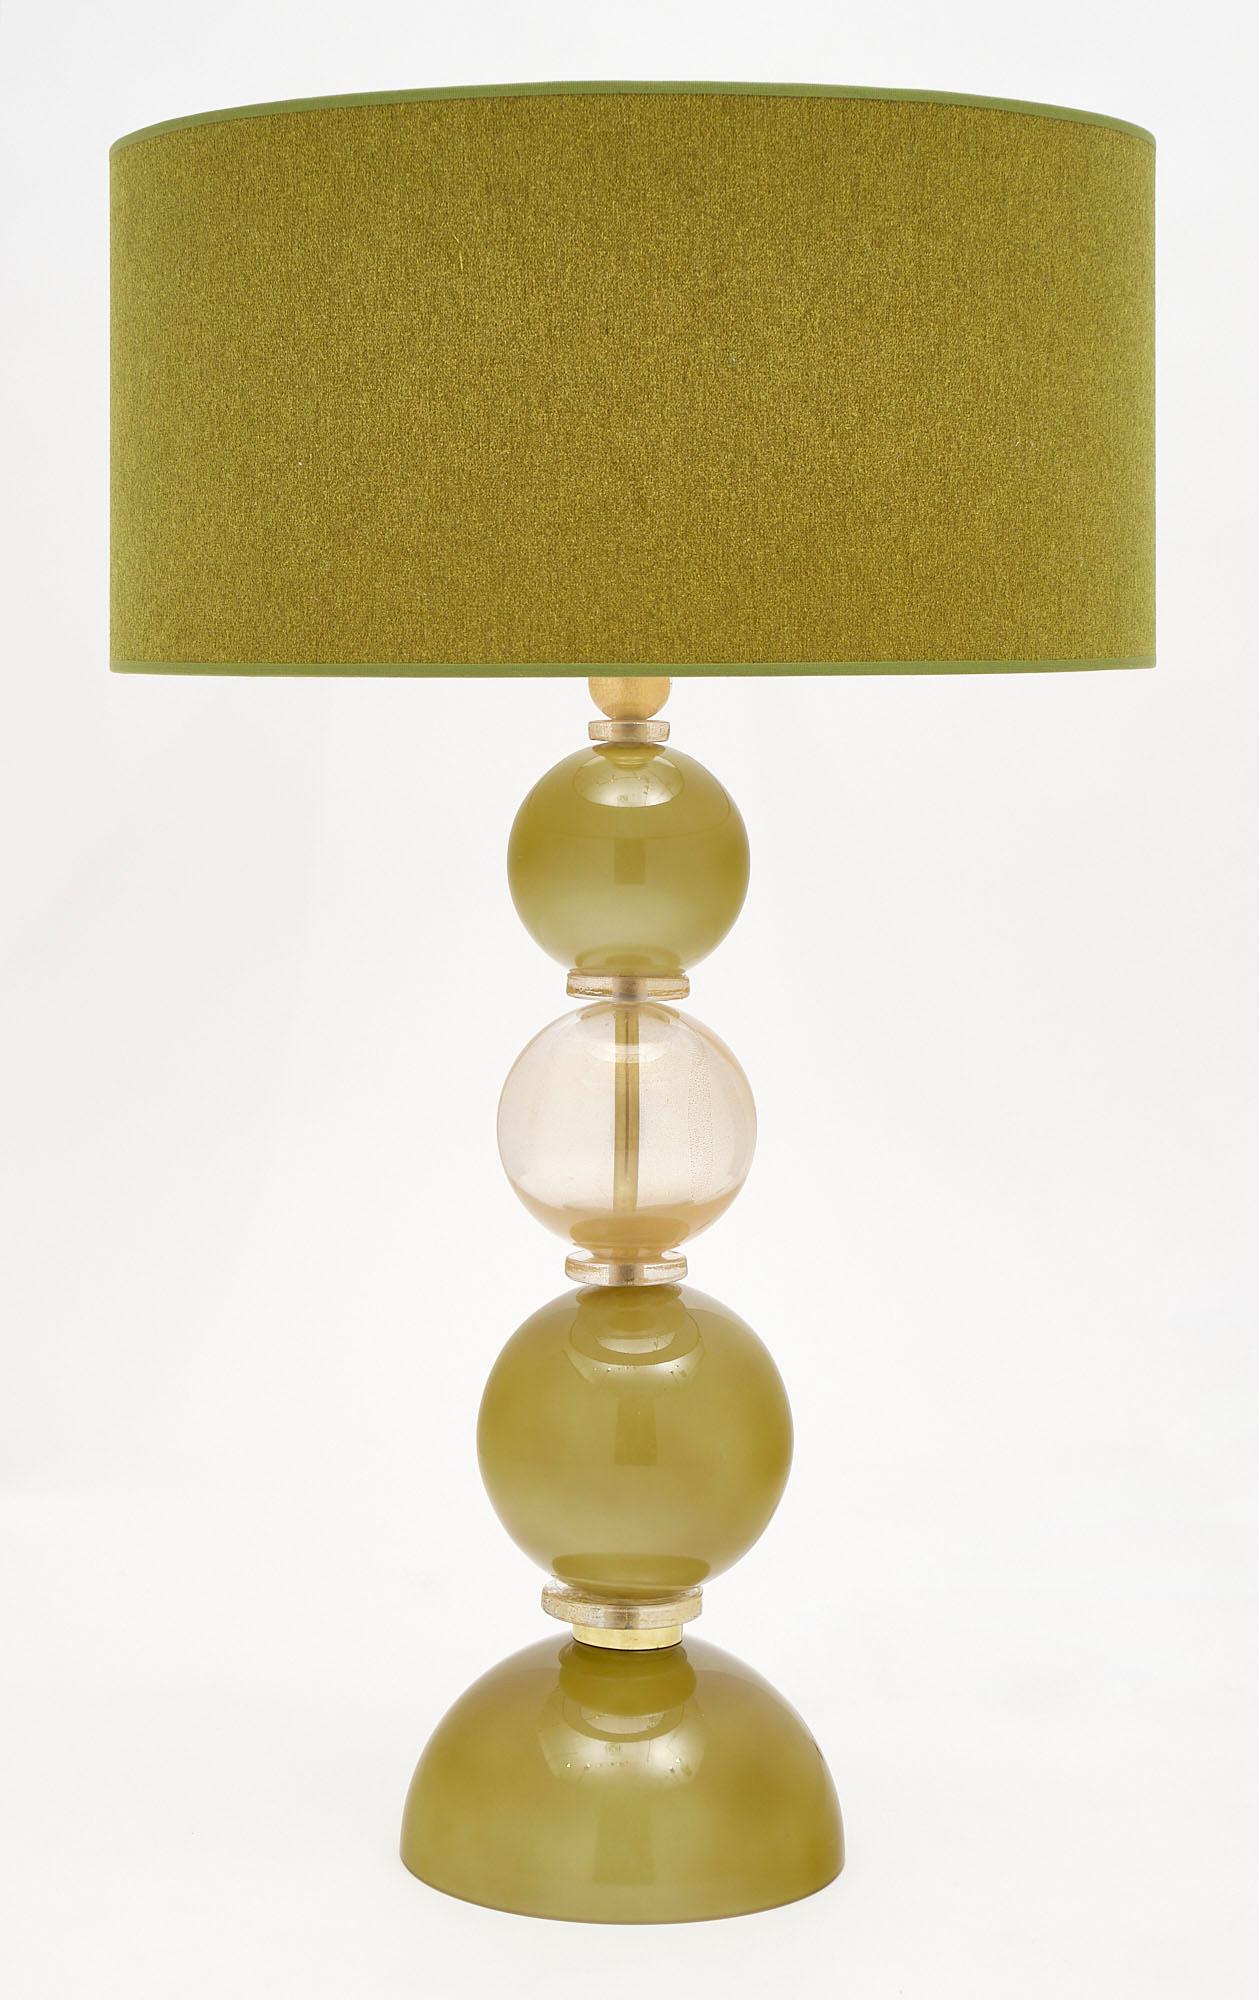 Pair of spring green Murano glass lamps featuring hand-blown glass spheres in spring green and light gold. We love the green linen shades and strong impression of this pair. They have been newly wired to fit US standards.